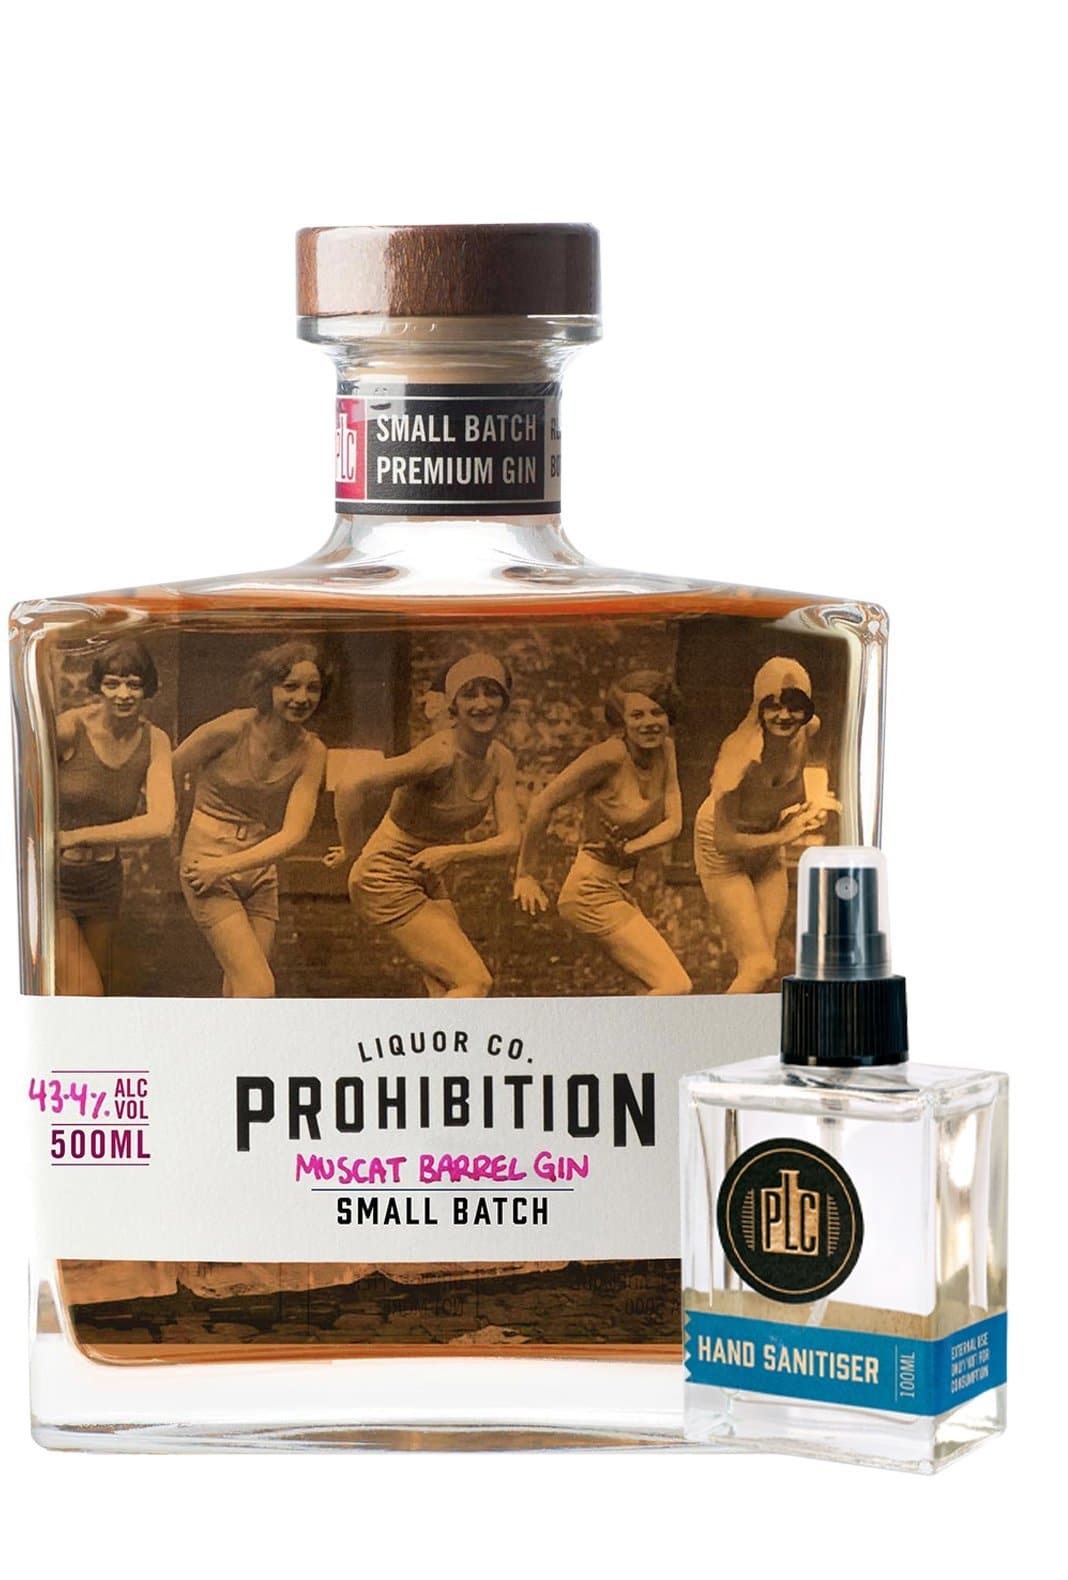 Prohibition Muscat Barrel Gin 43.4% 500ml | Gin | Shop online at Spirits of France